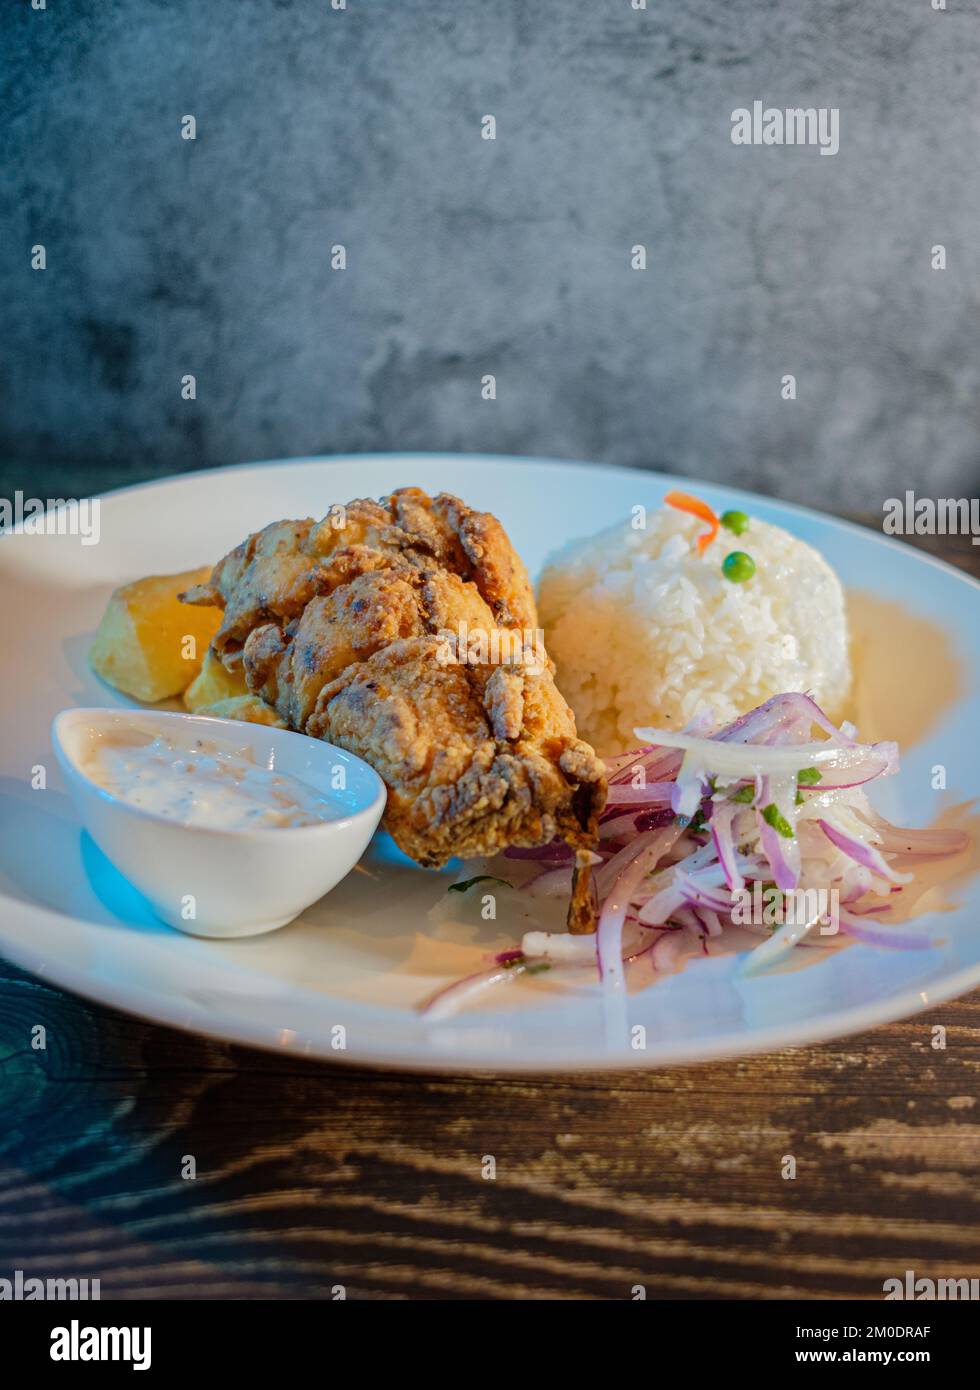 Fried fish filet with white rice, potatoes and salad Stock Photo